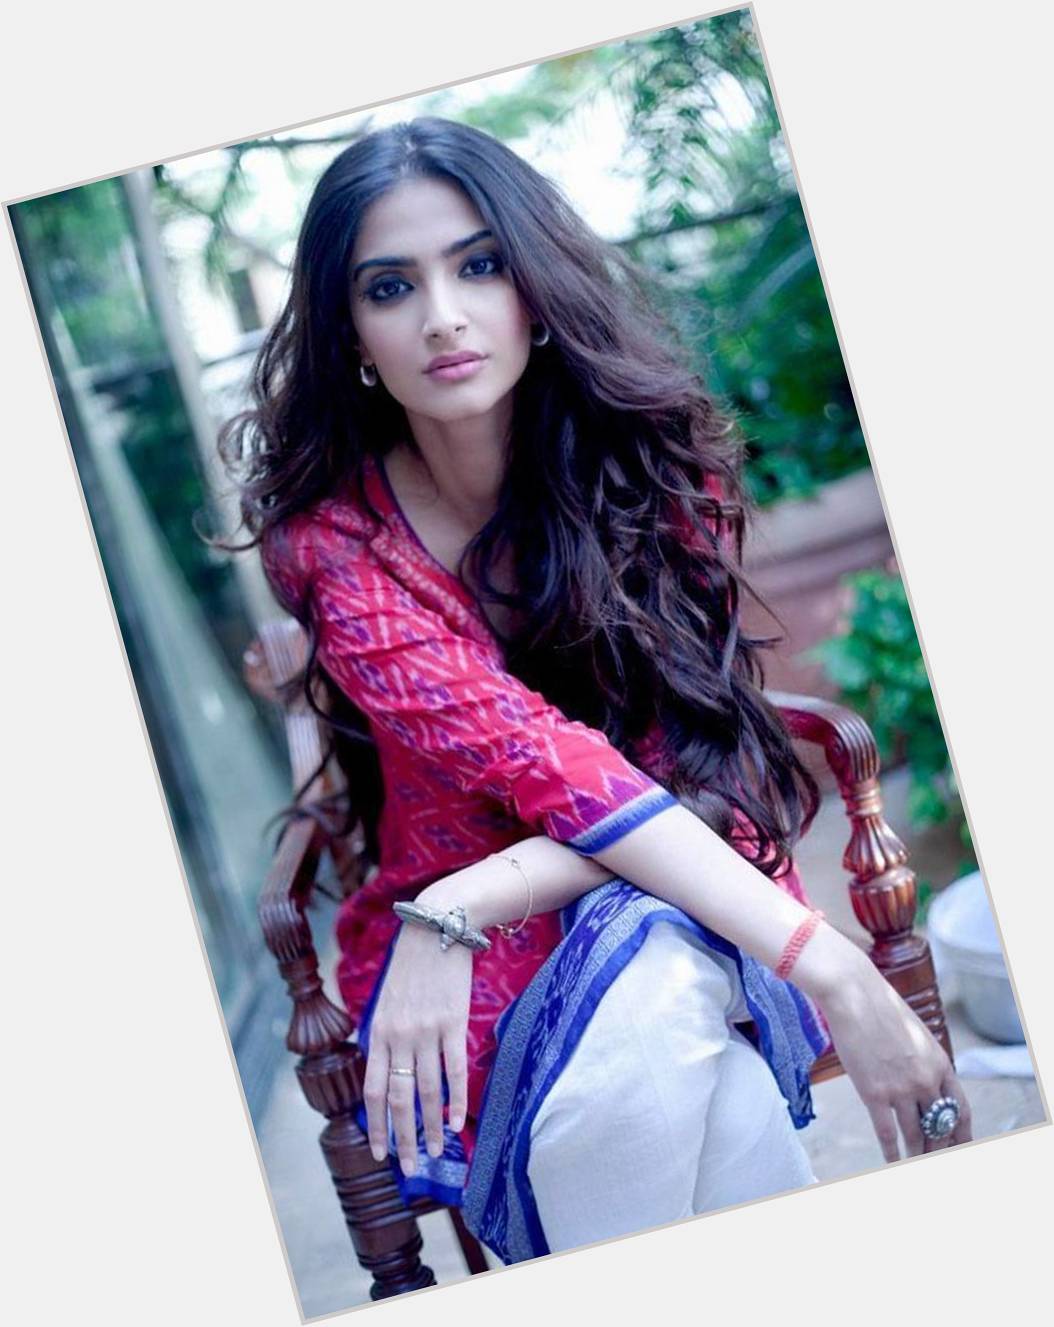 Wishing Sonam Kapoor a very Happy Birthday! Listen to her songs, back-to-back until 11am on  